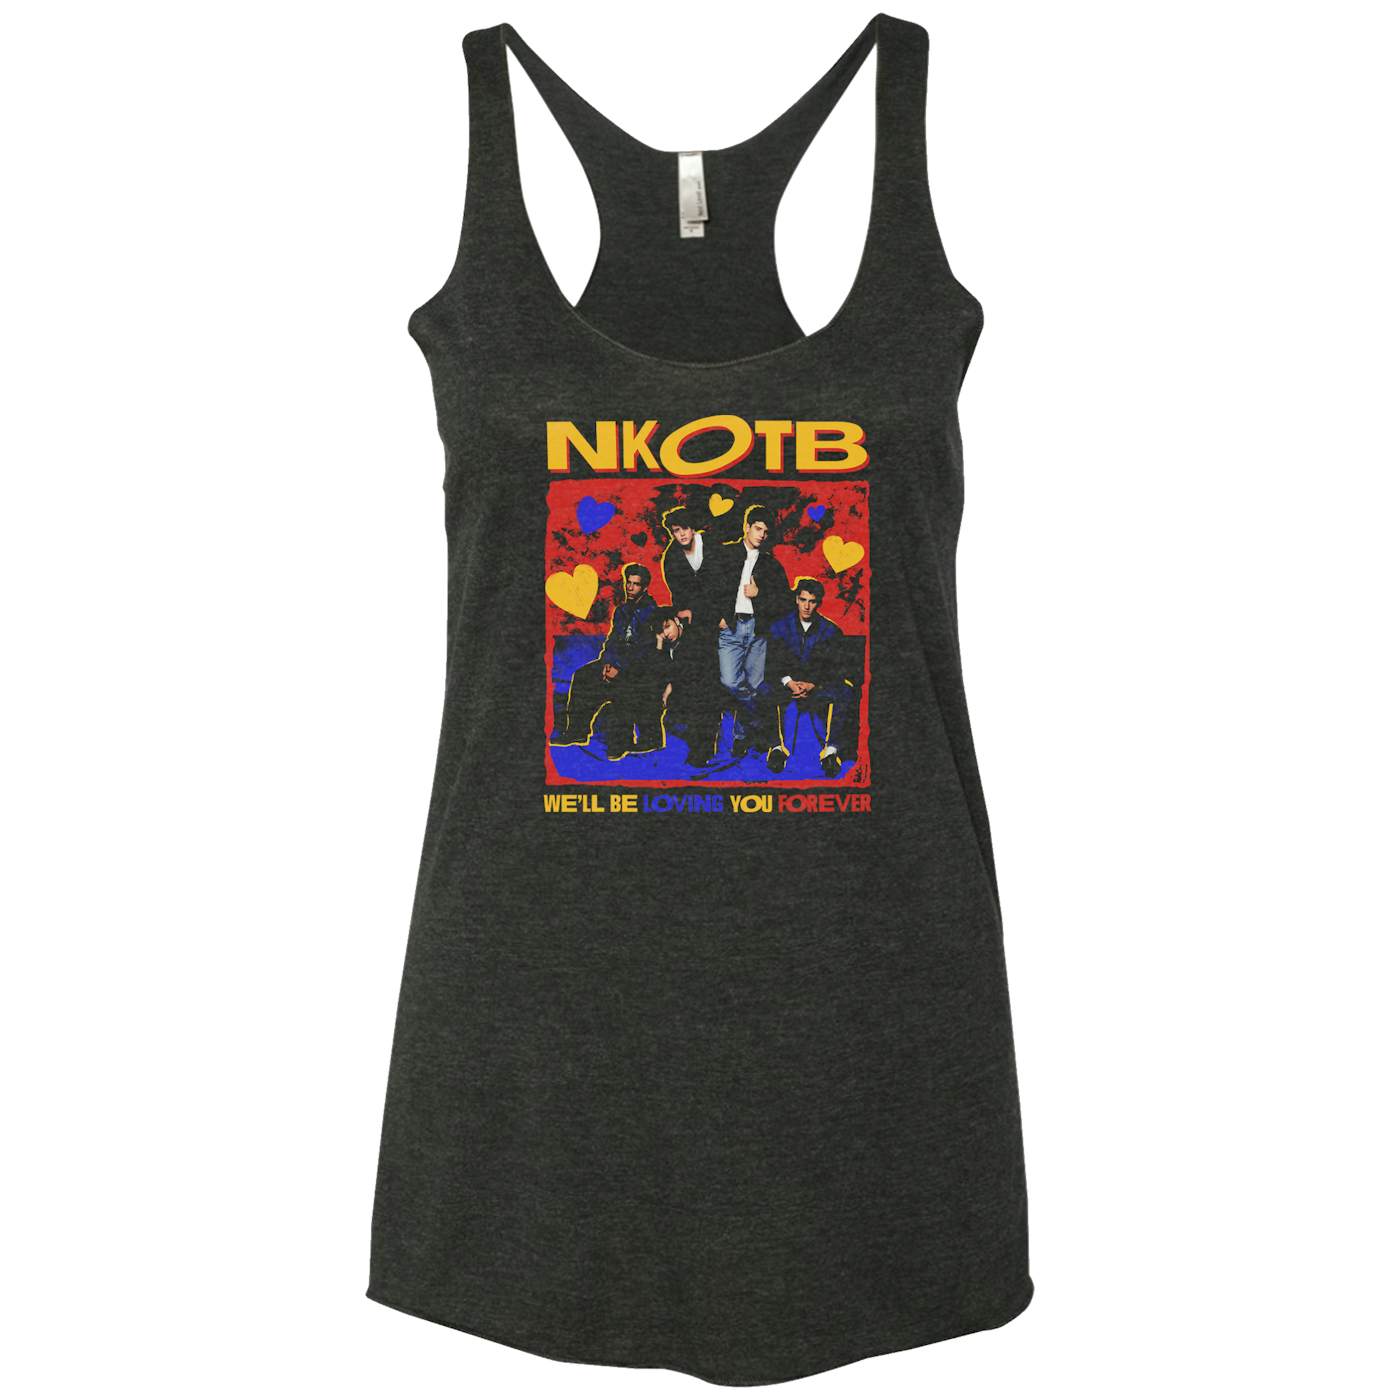 New Kids On The Block The Mixtape Tour Loving You Forever Ladies Tank Top